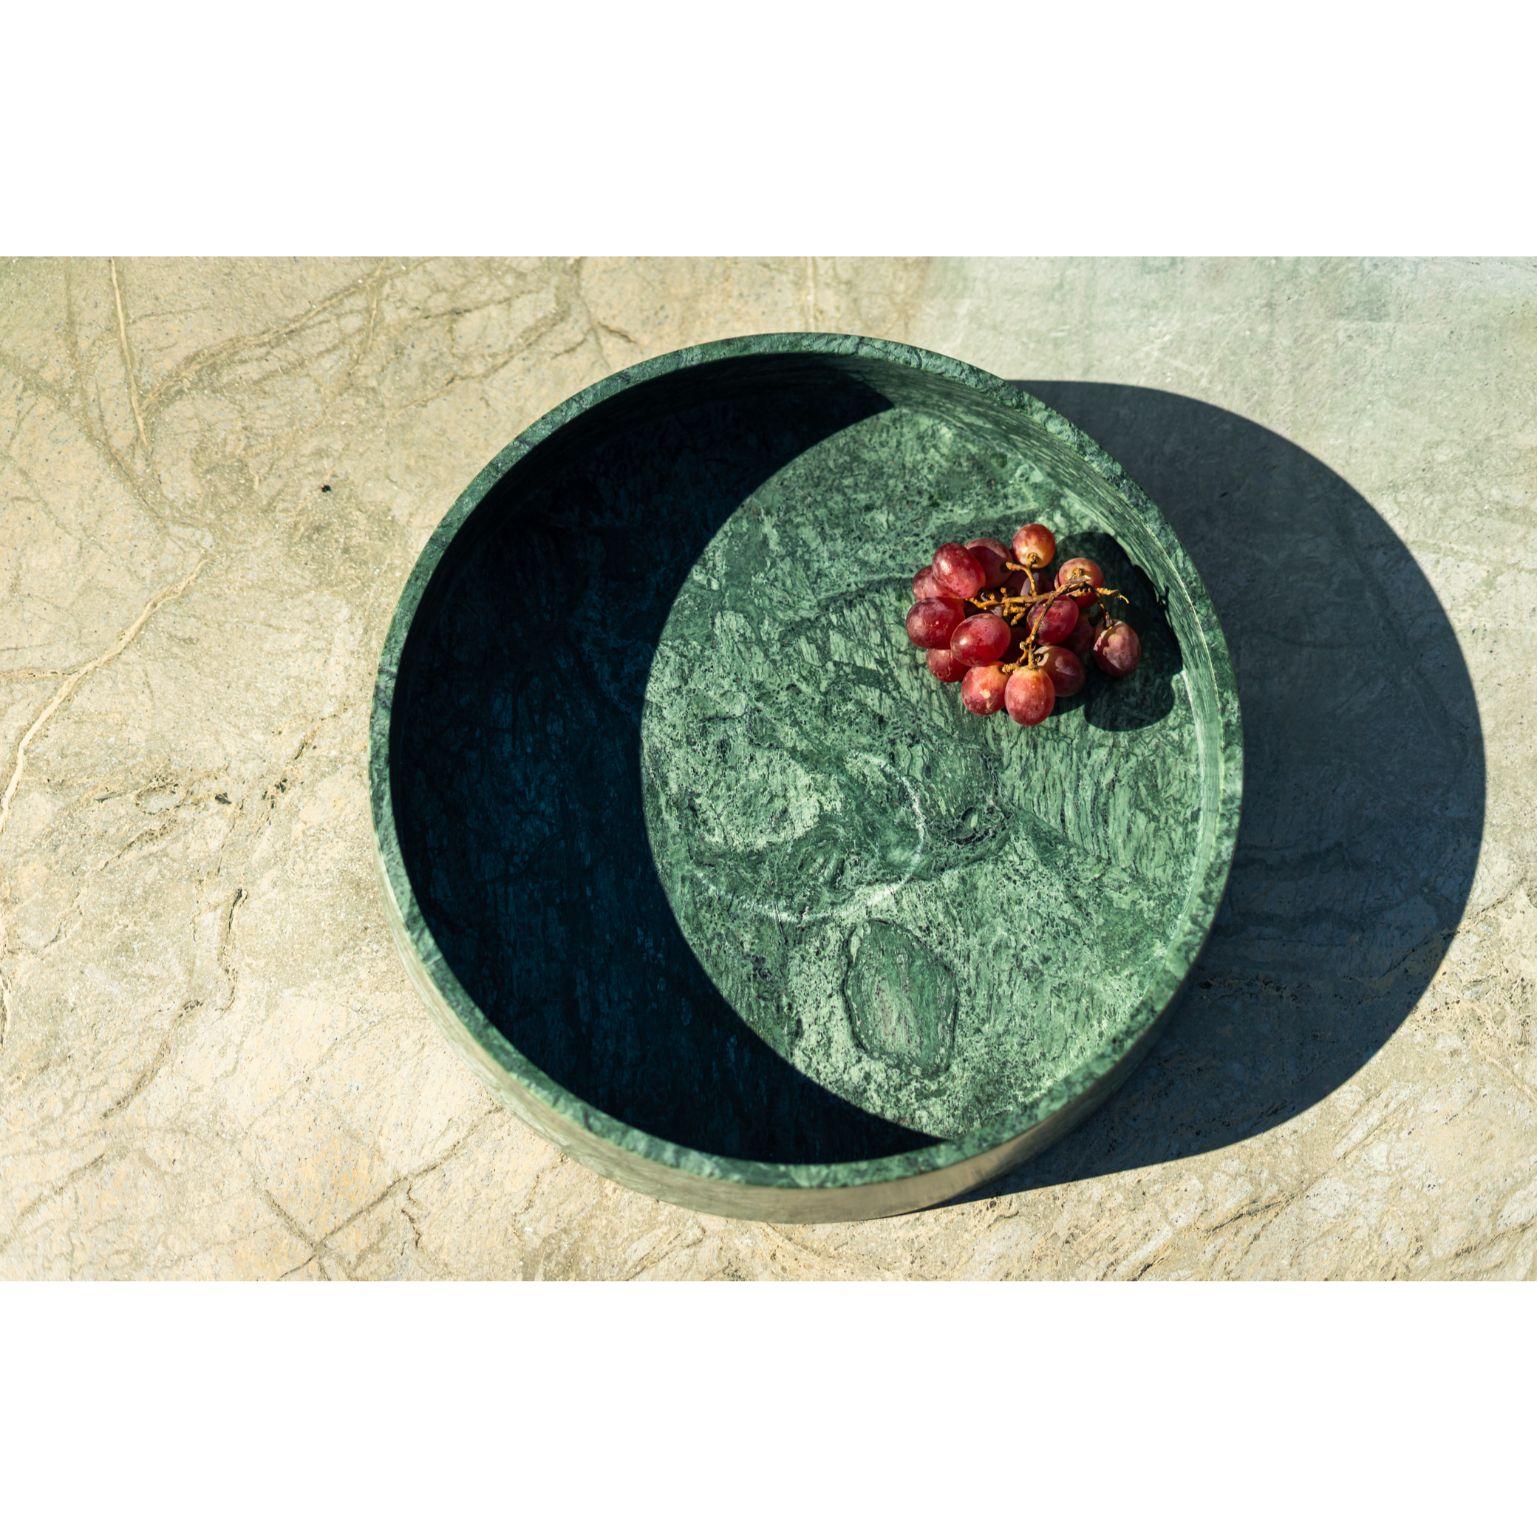 Plumb marble tray - Large by Essenzia
Materials: India Green
Dimensions: 45 x 45 cm

Also available: Pele de Tigre, Estremoz White, Carrara, Rosa Portugal

Simple and functional object with a timeless elegance that can be used to place fruit